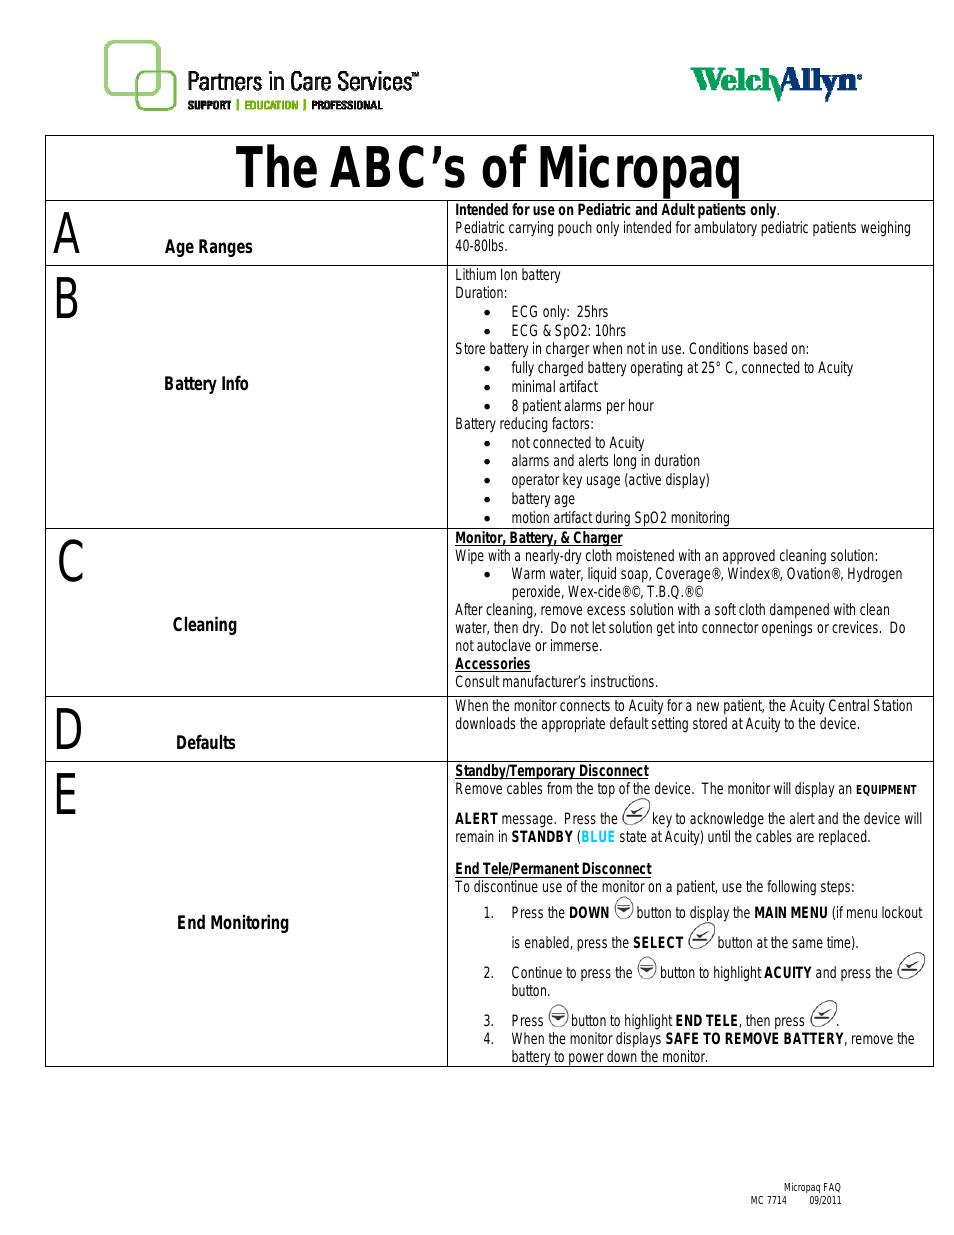 ABCs of Micropaq - Quick Reference Guide